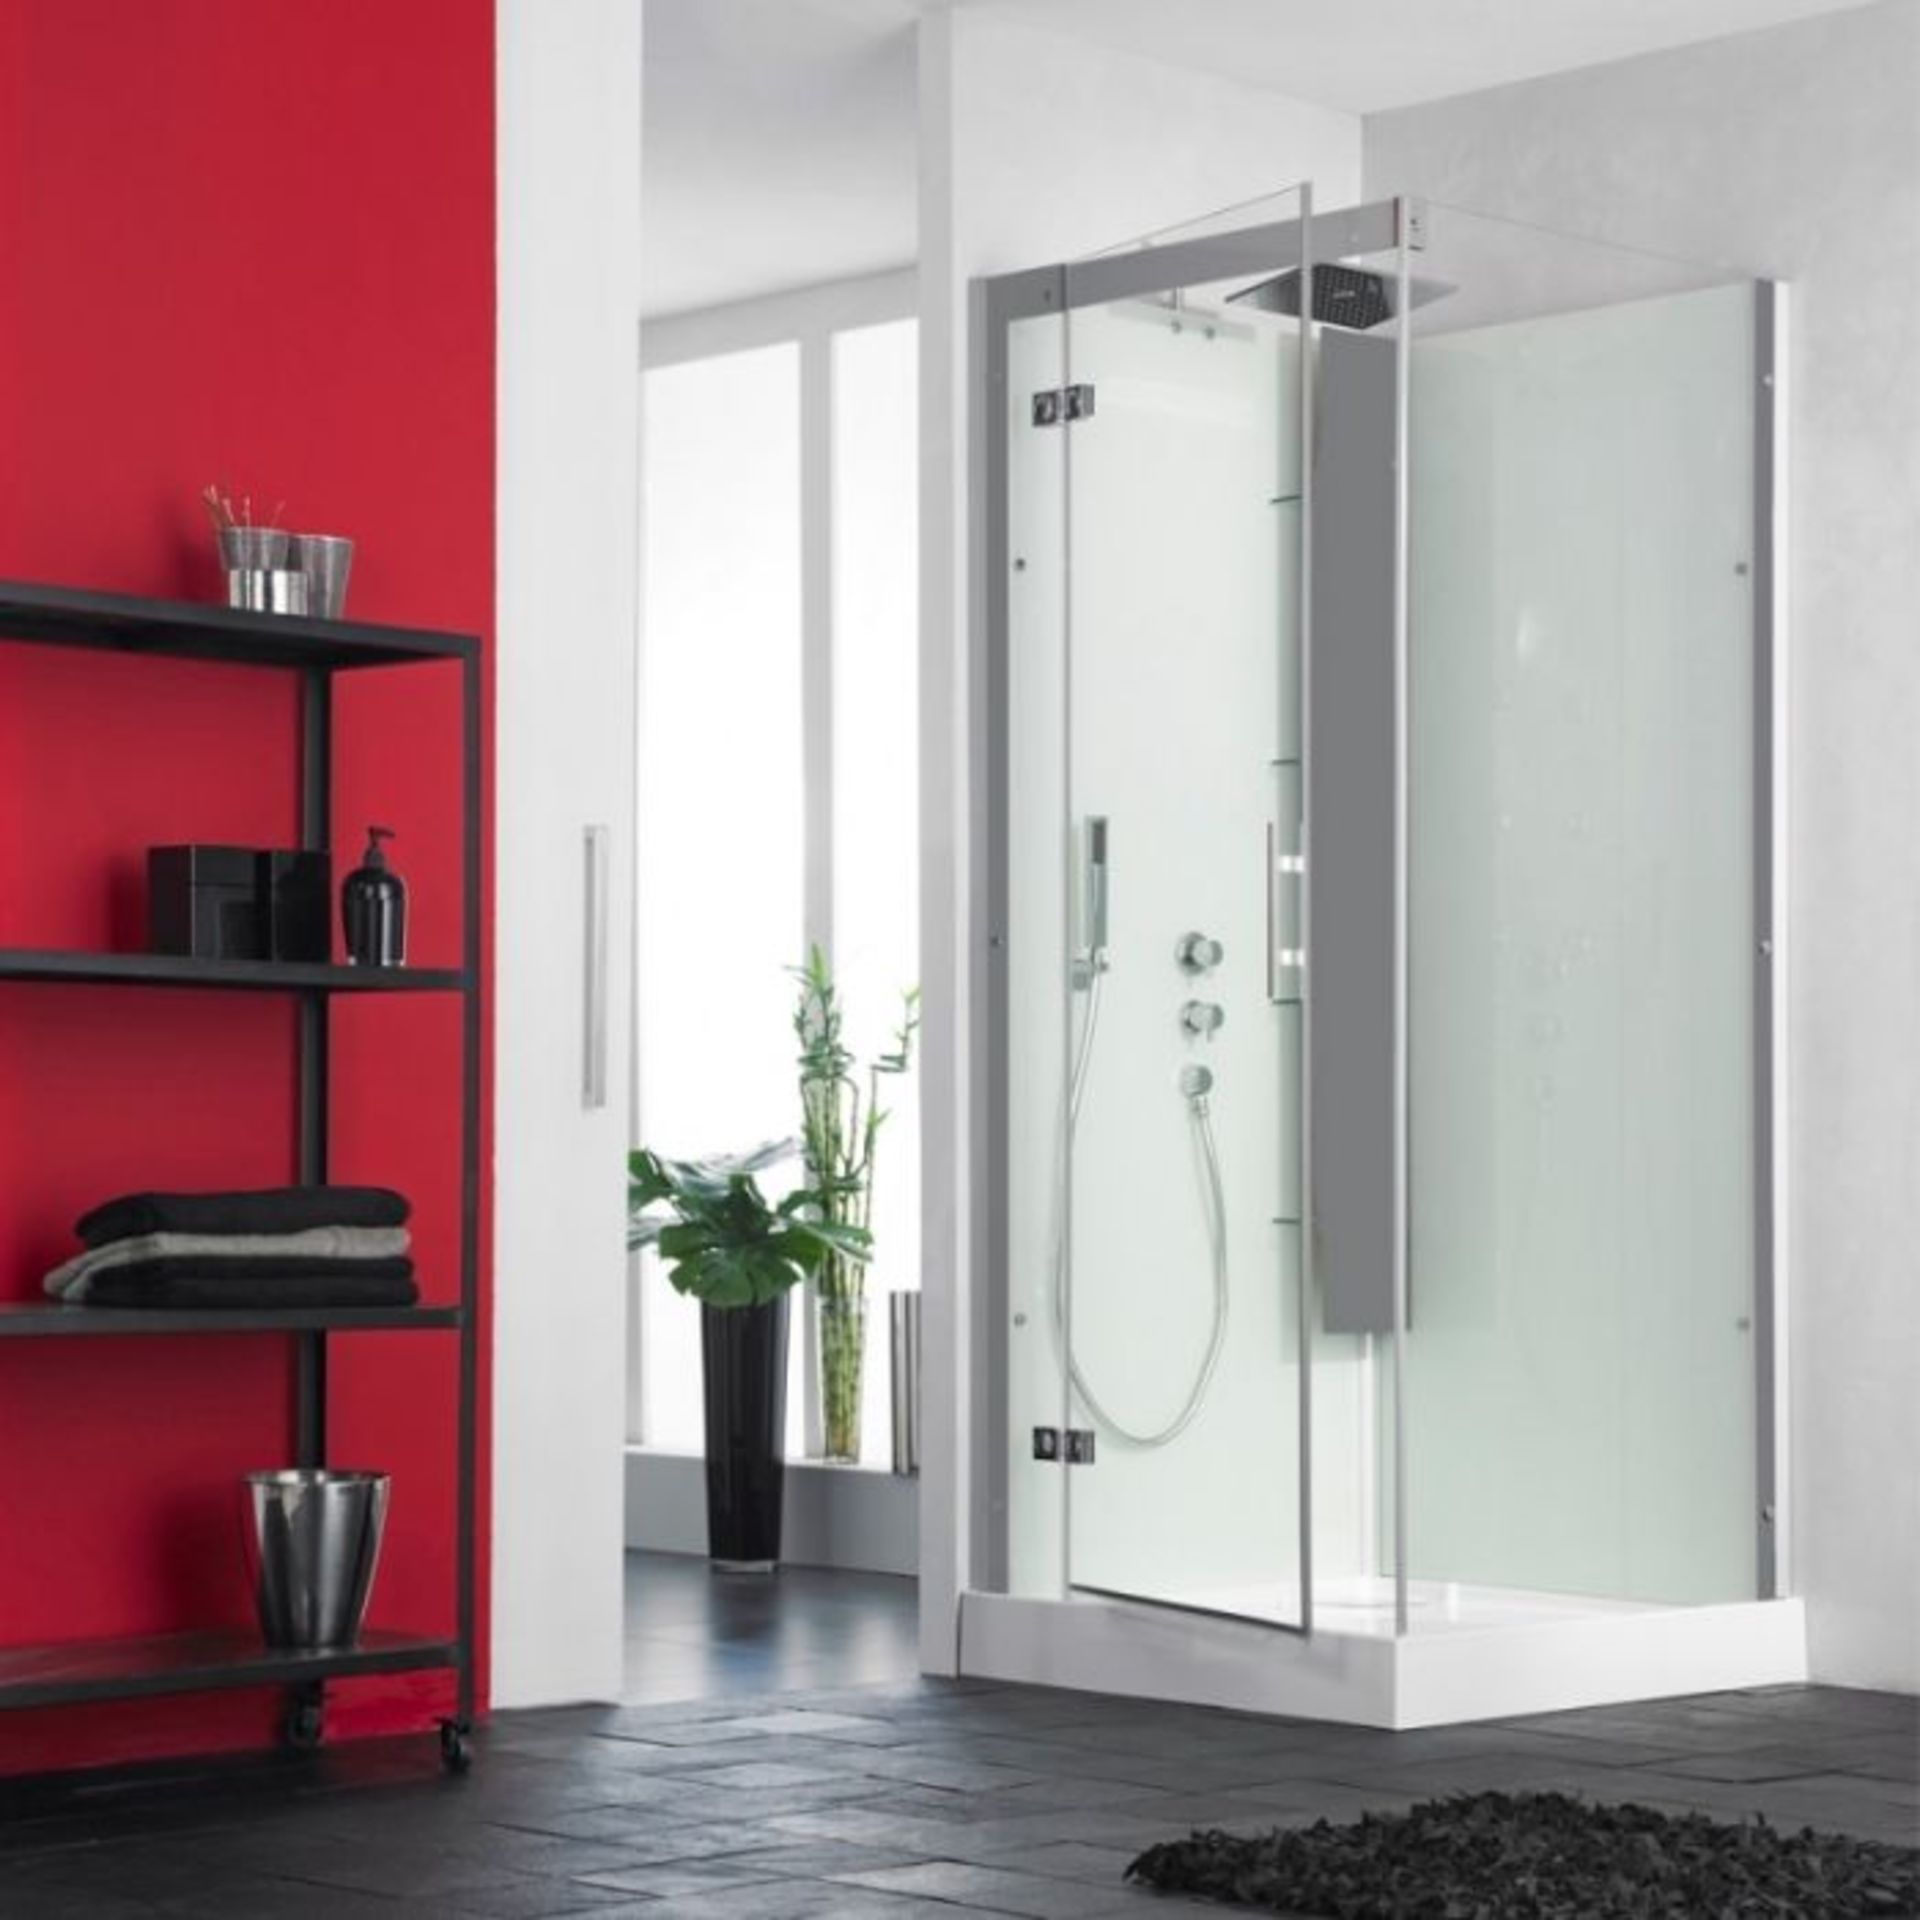 Kinedo Horizon 1100mm x 800mm Corner Pivot Shower Cubicle, new, the cheapest online RRP we can